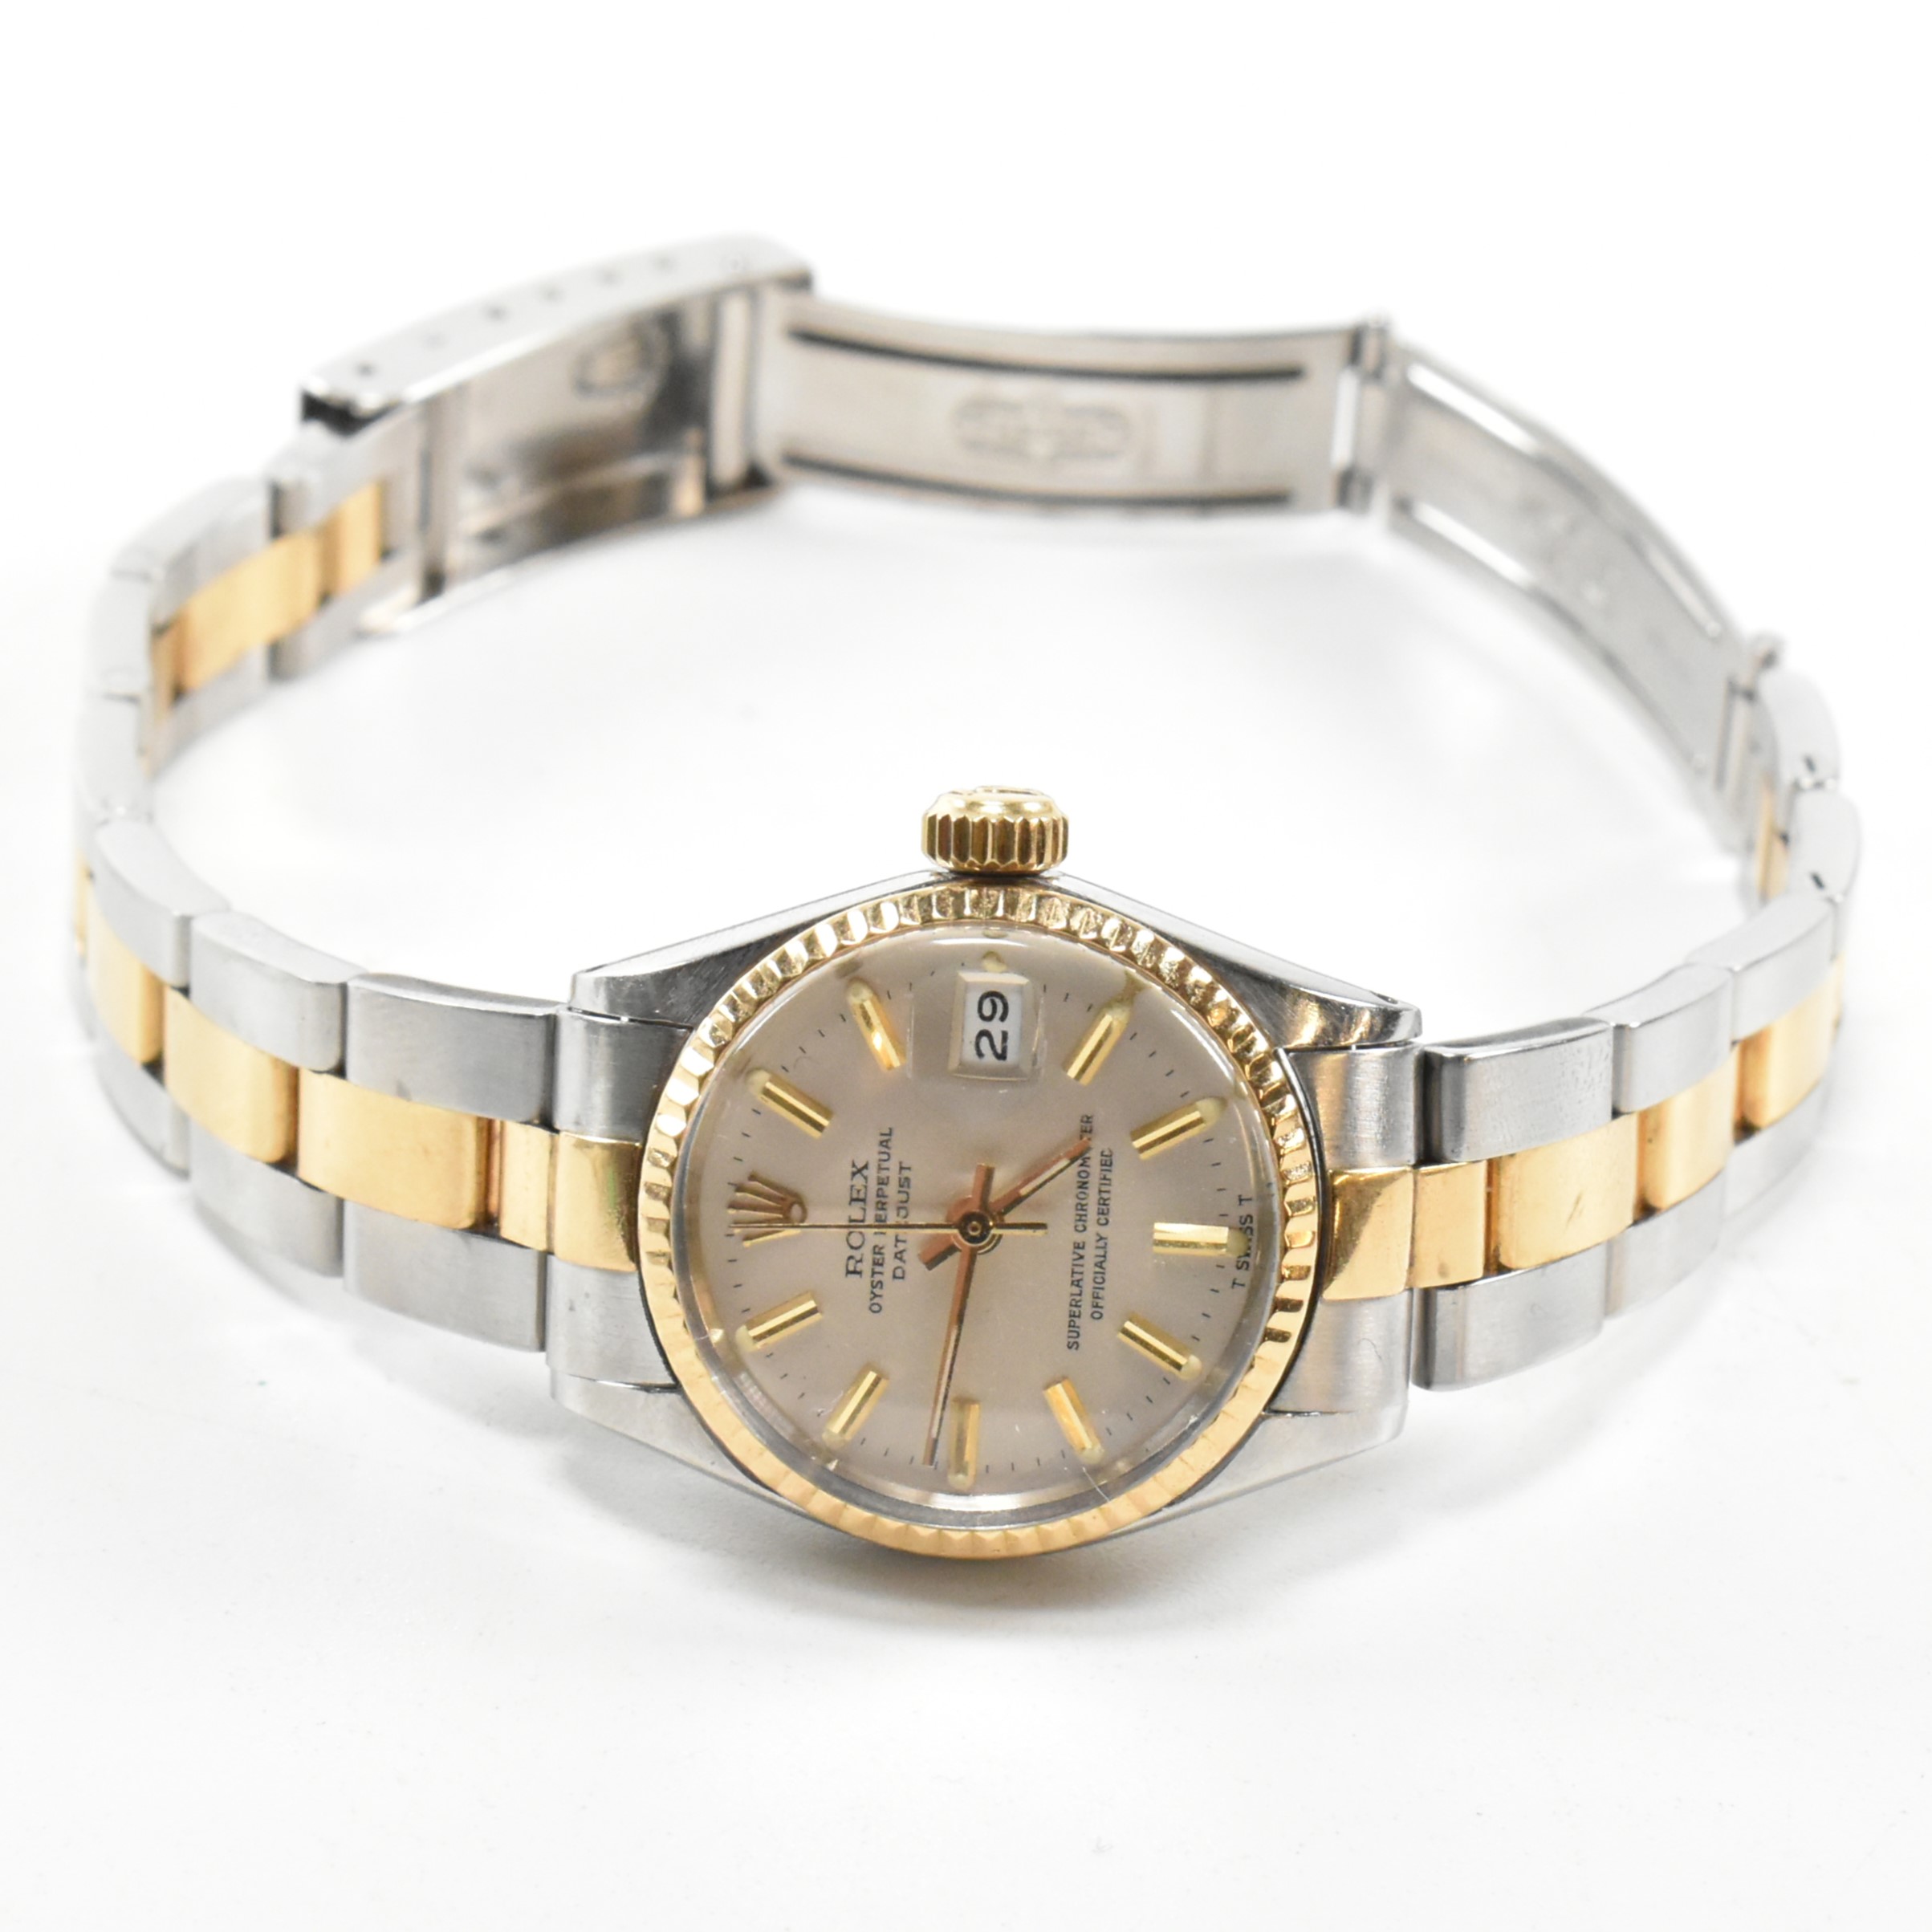 ROLEX OYSTER PERPETUAL DATEJUST LADIES CHRONOMETER - Image 2 of 5